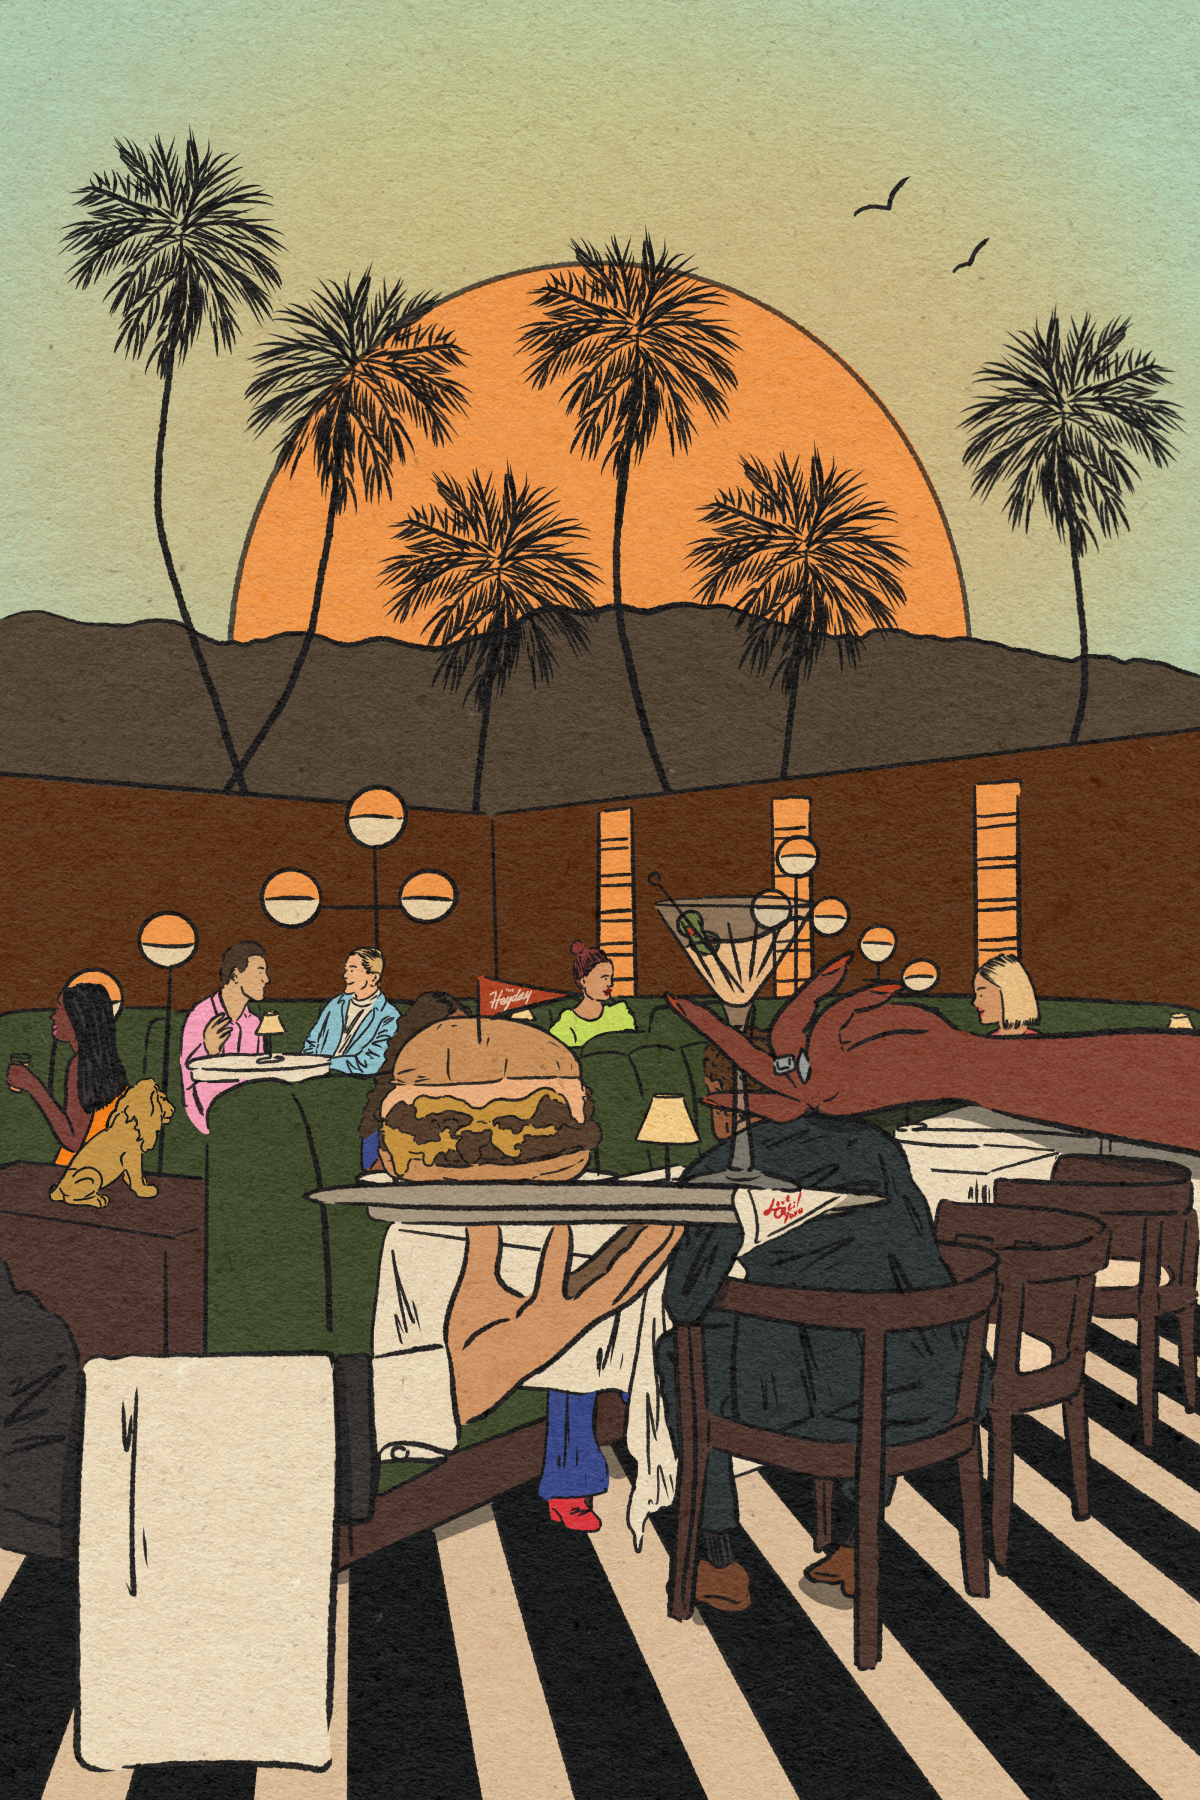 An illustration of Palm Springs